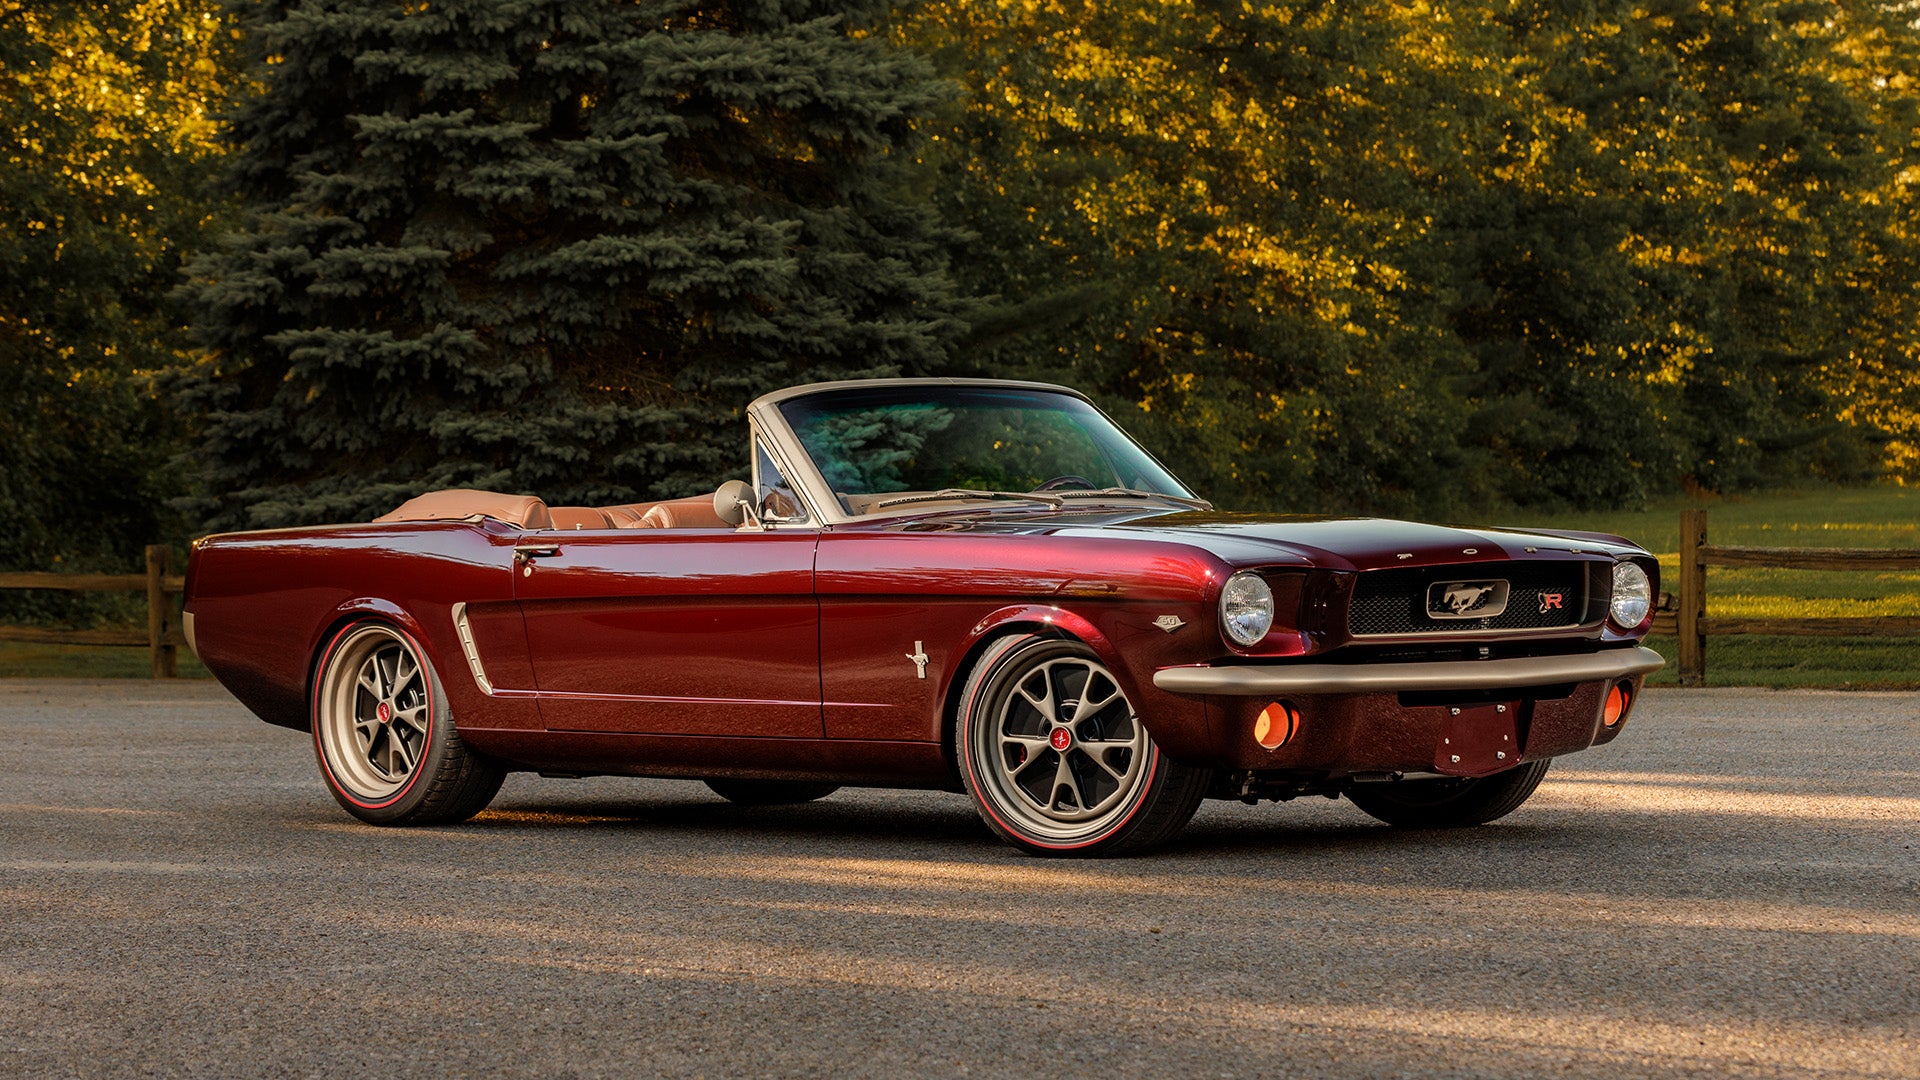 The 1965 Ford Mustang by Ringbrothers is a sleek and powerful cruiser, boasting an understated perfection with its coyote-powered engine.